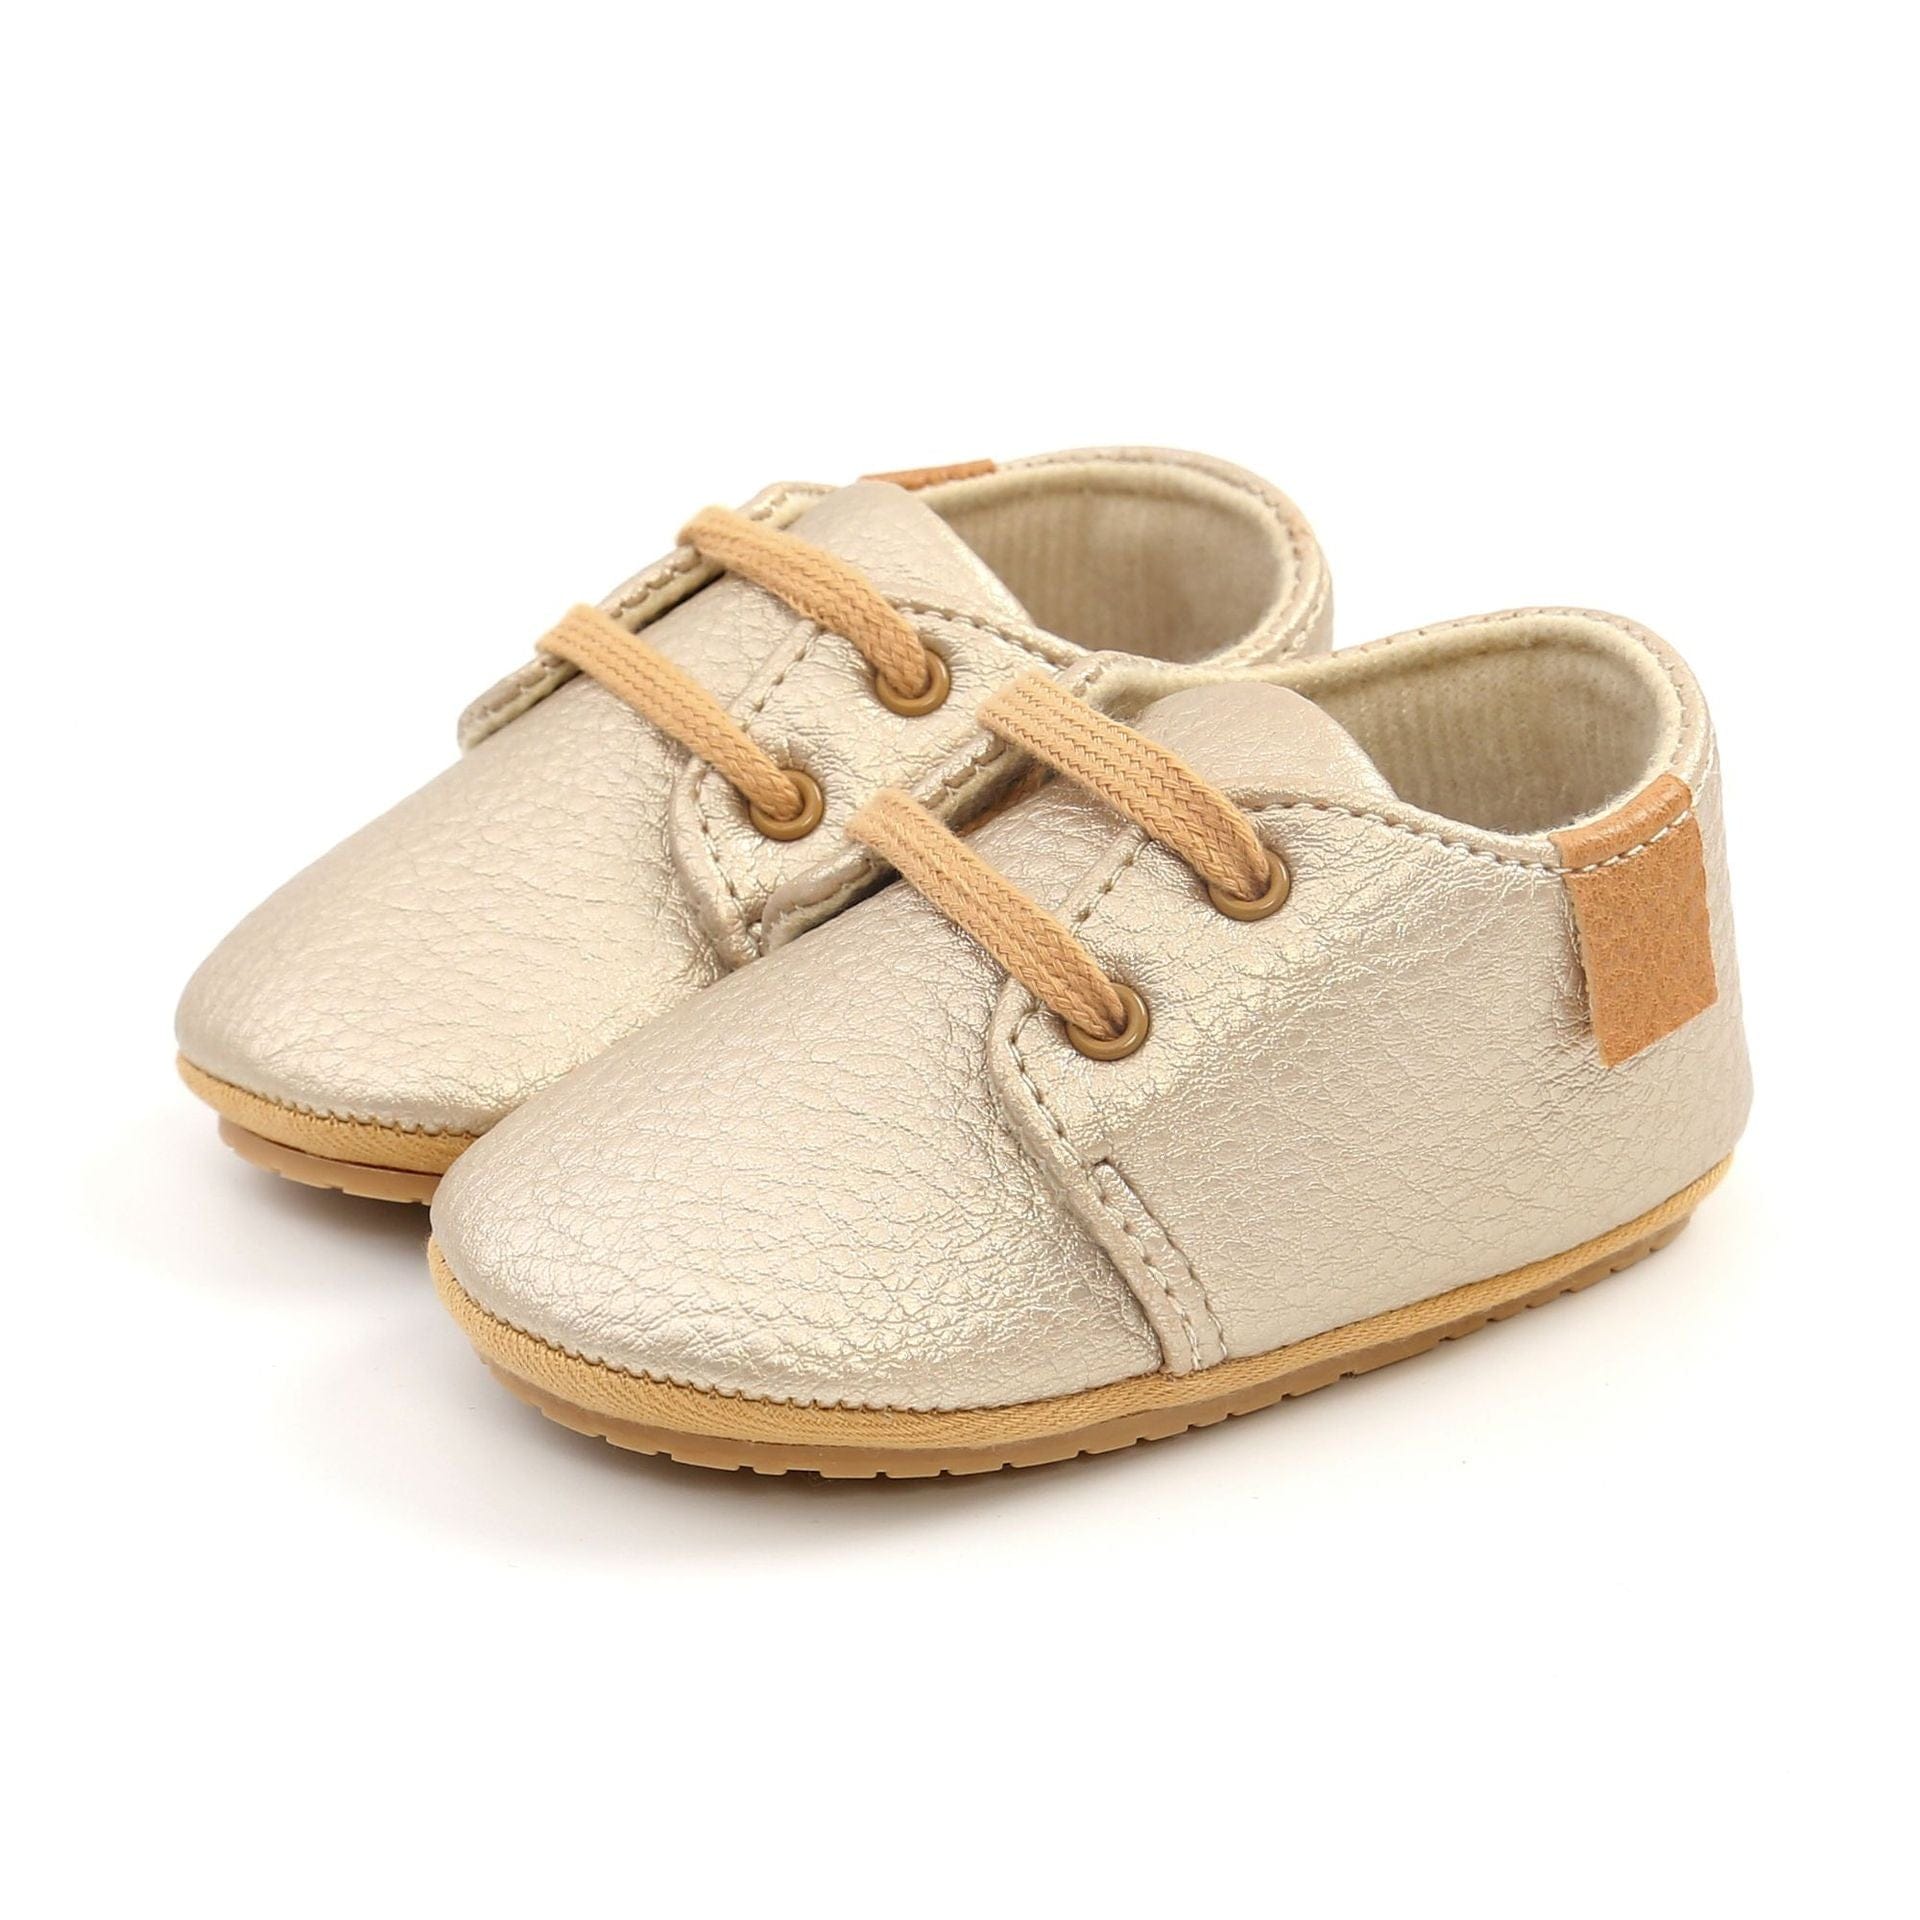 Proactive Baby Gold / 0-6 Months NewBaby Retro Leather Baby Shoes With Rubber Sole Best First Walkers For Newborn/Infant